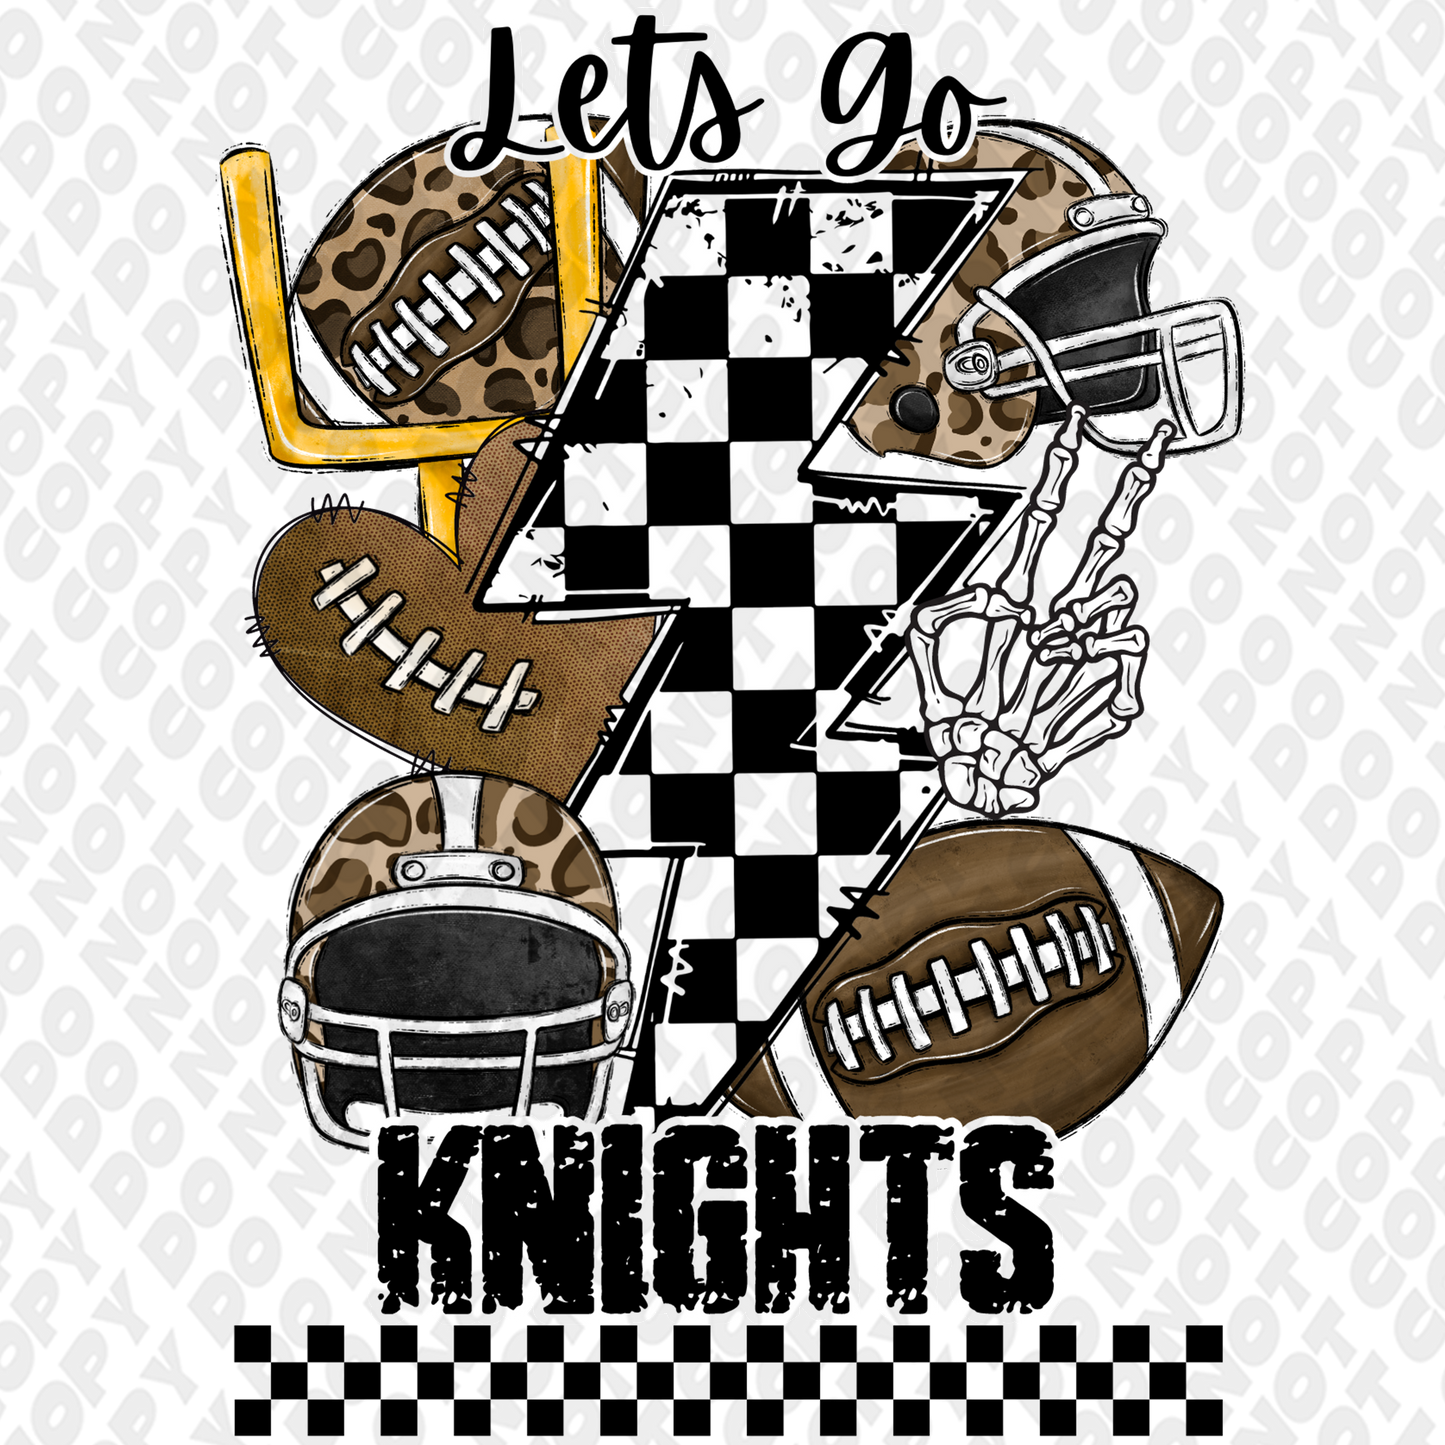 Let's go Knights